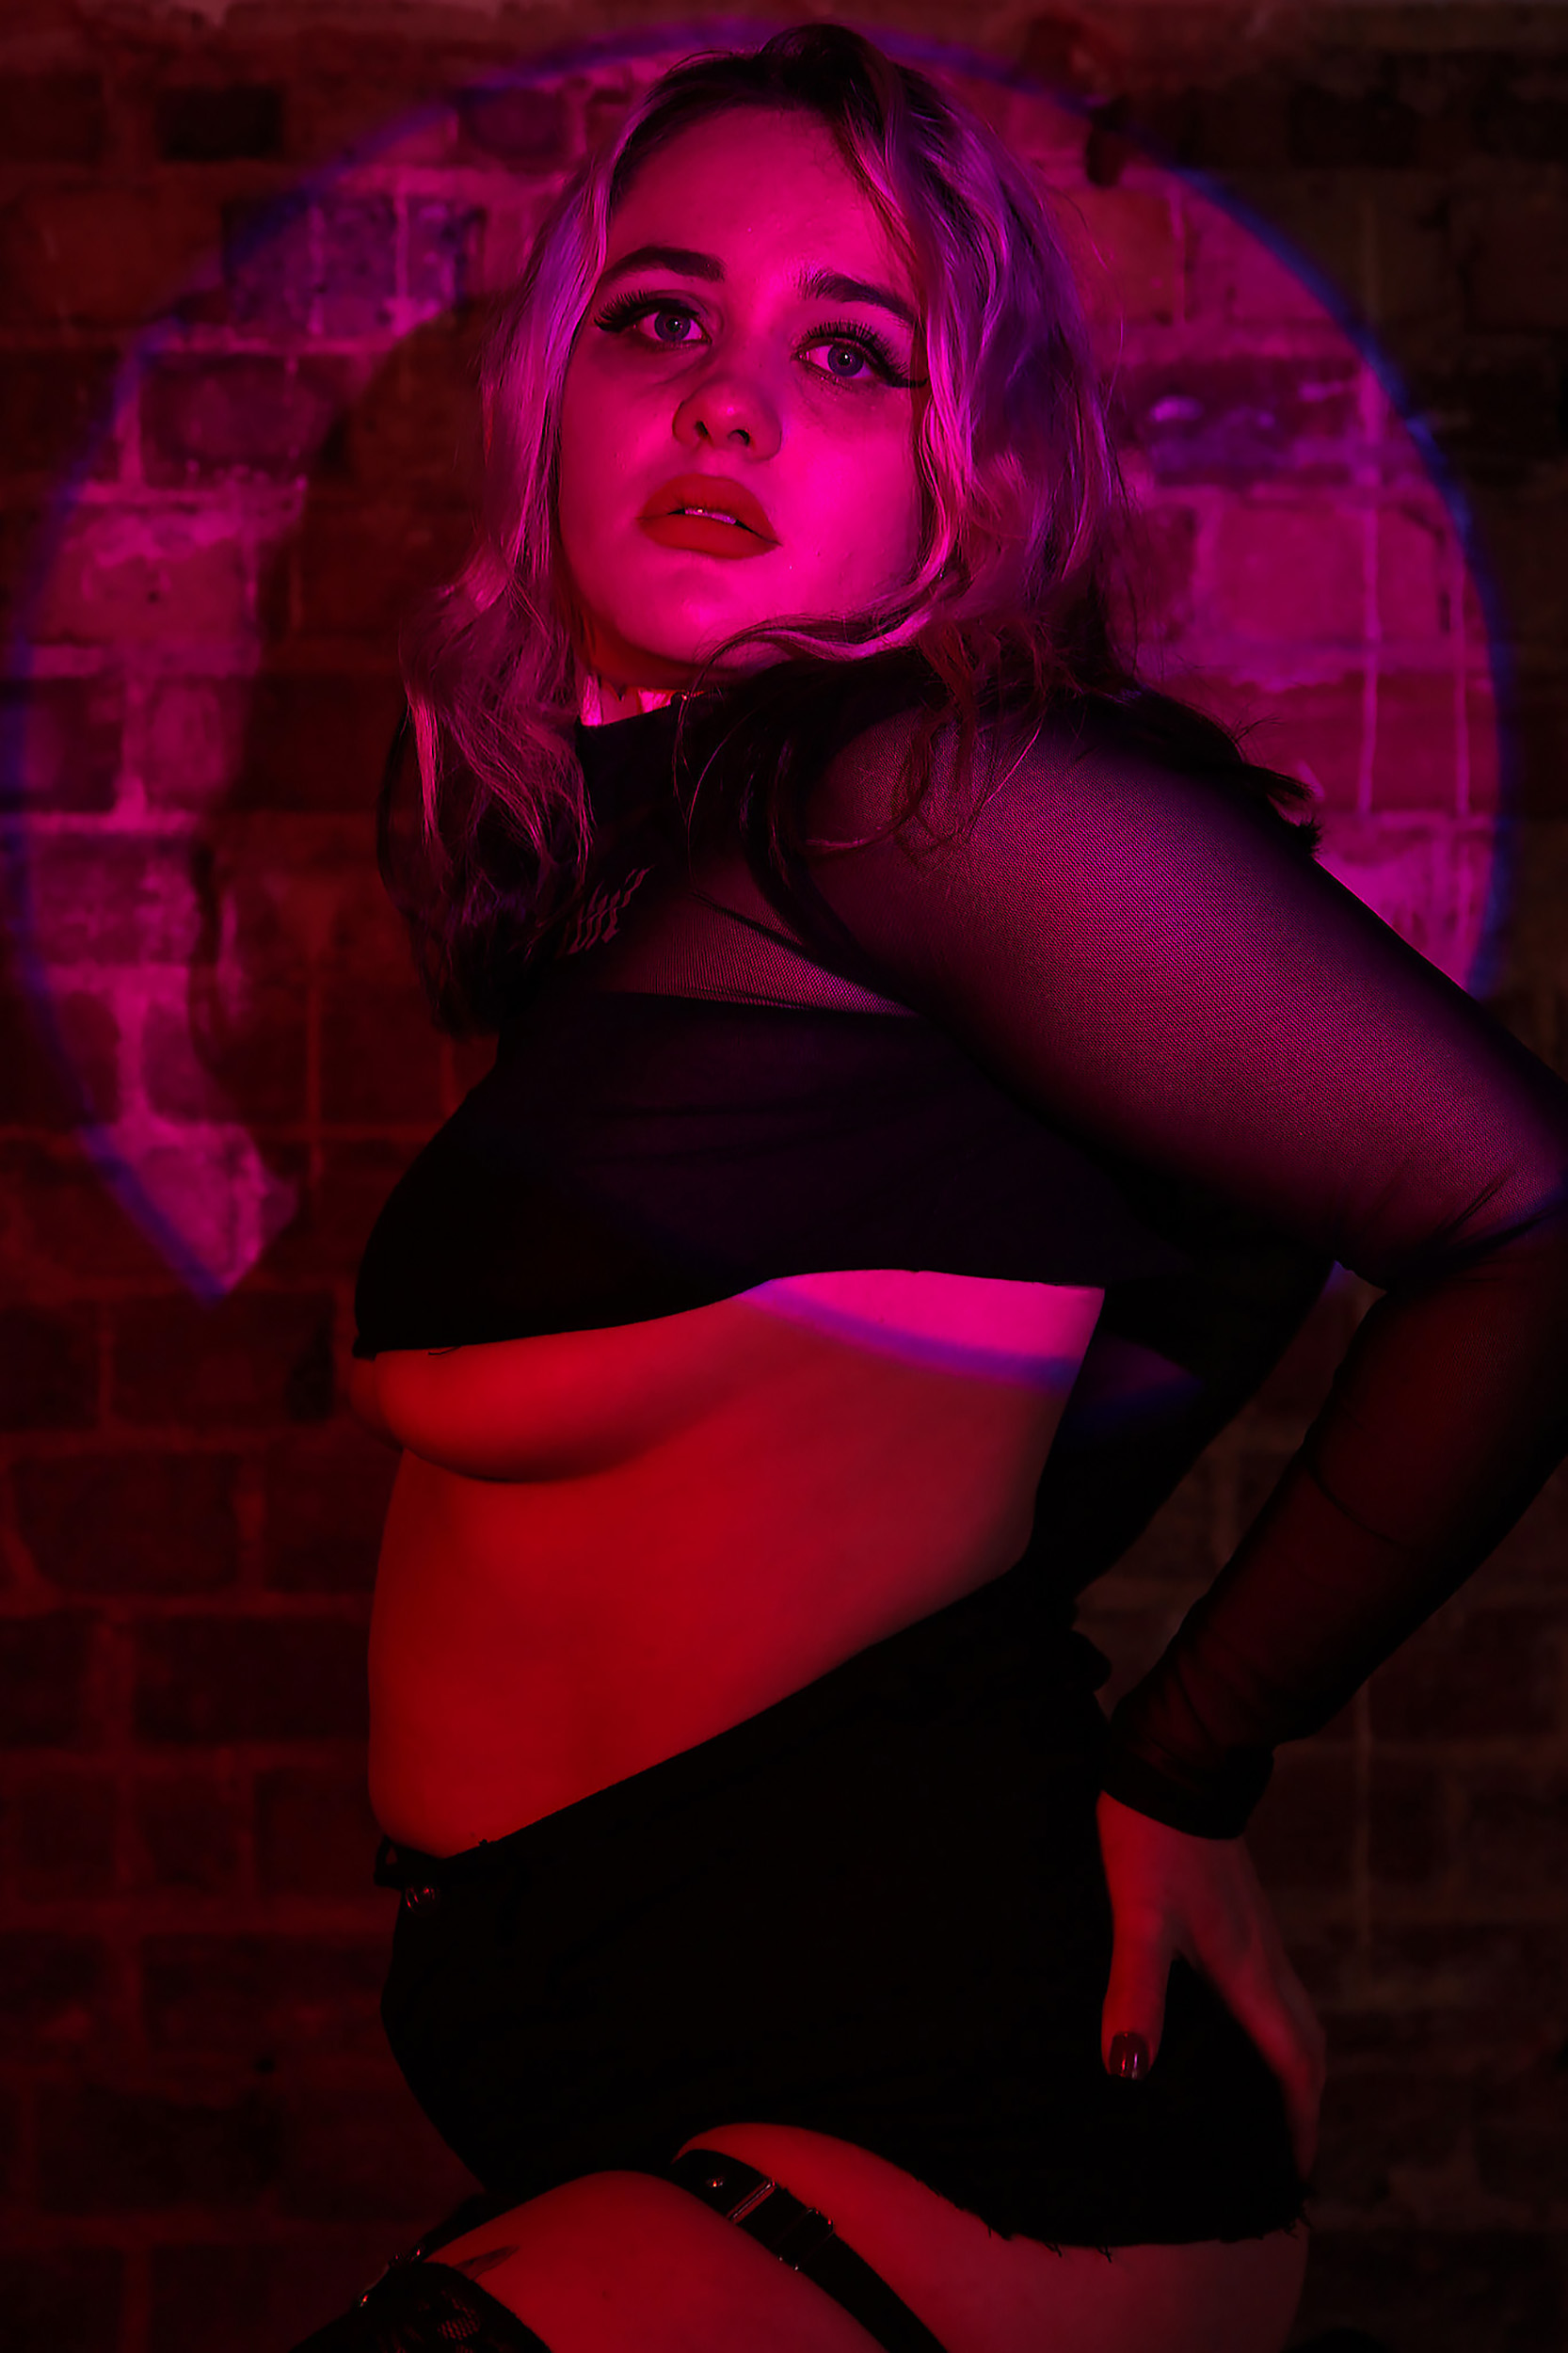 Portrait Photography by Chloe Sibley depicting a femme burlesque performer in front of a brick wall, with purple and pink spotlighting surrounding her, wearing a black crop top that leaves some underboob on display